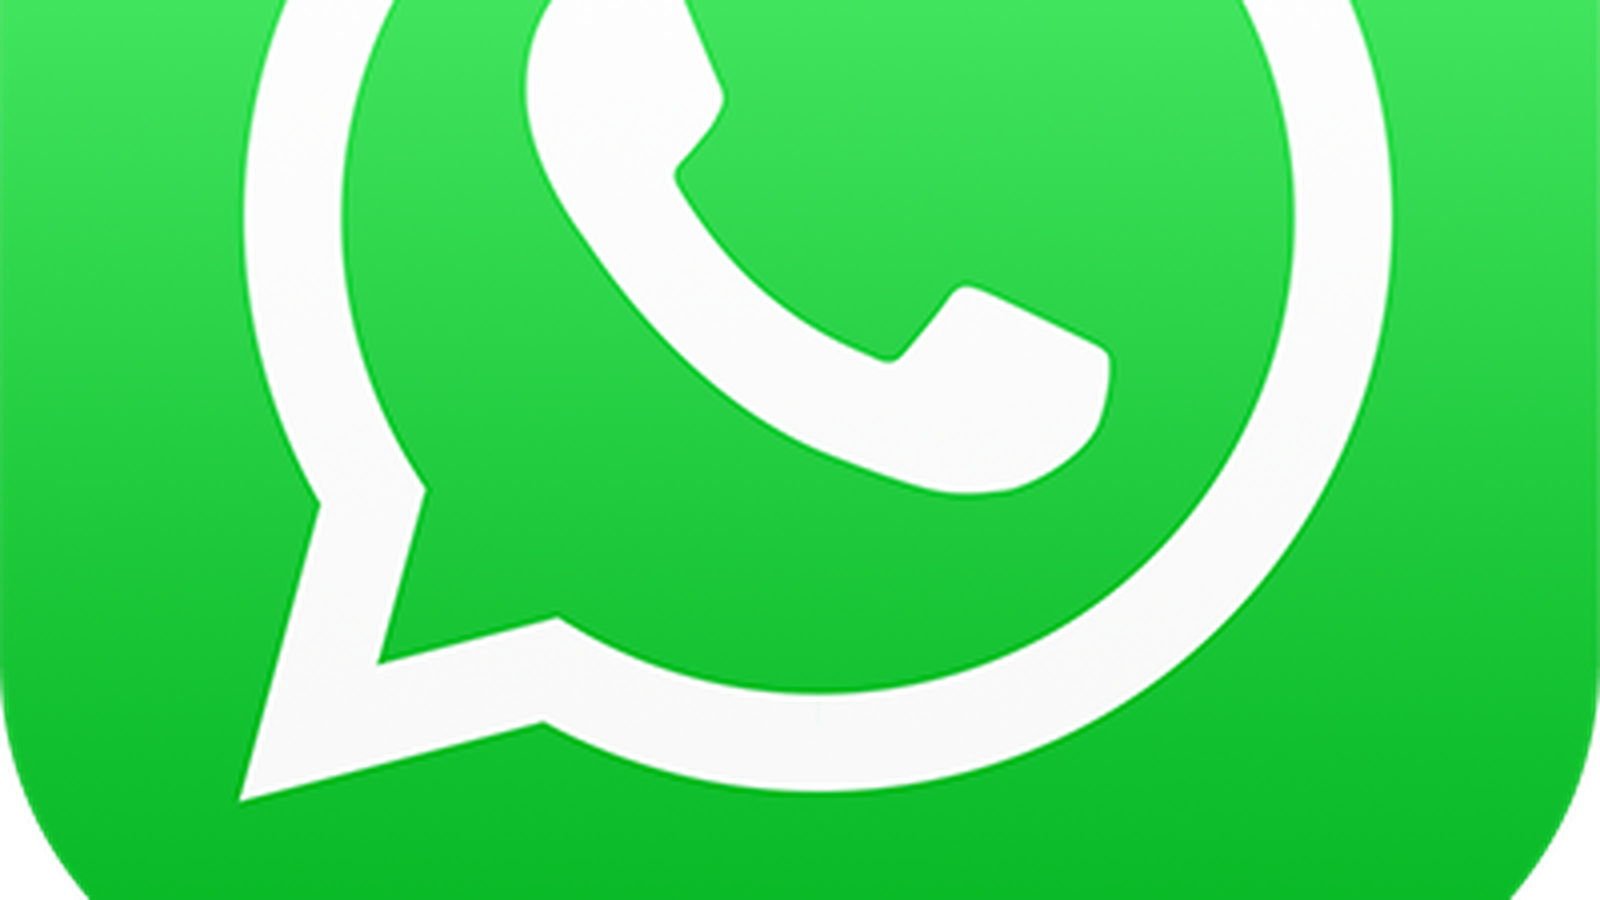 download whatsapp video call for mac